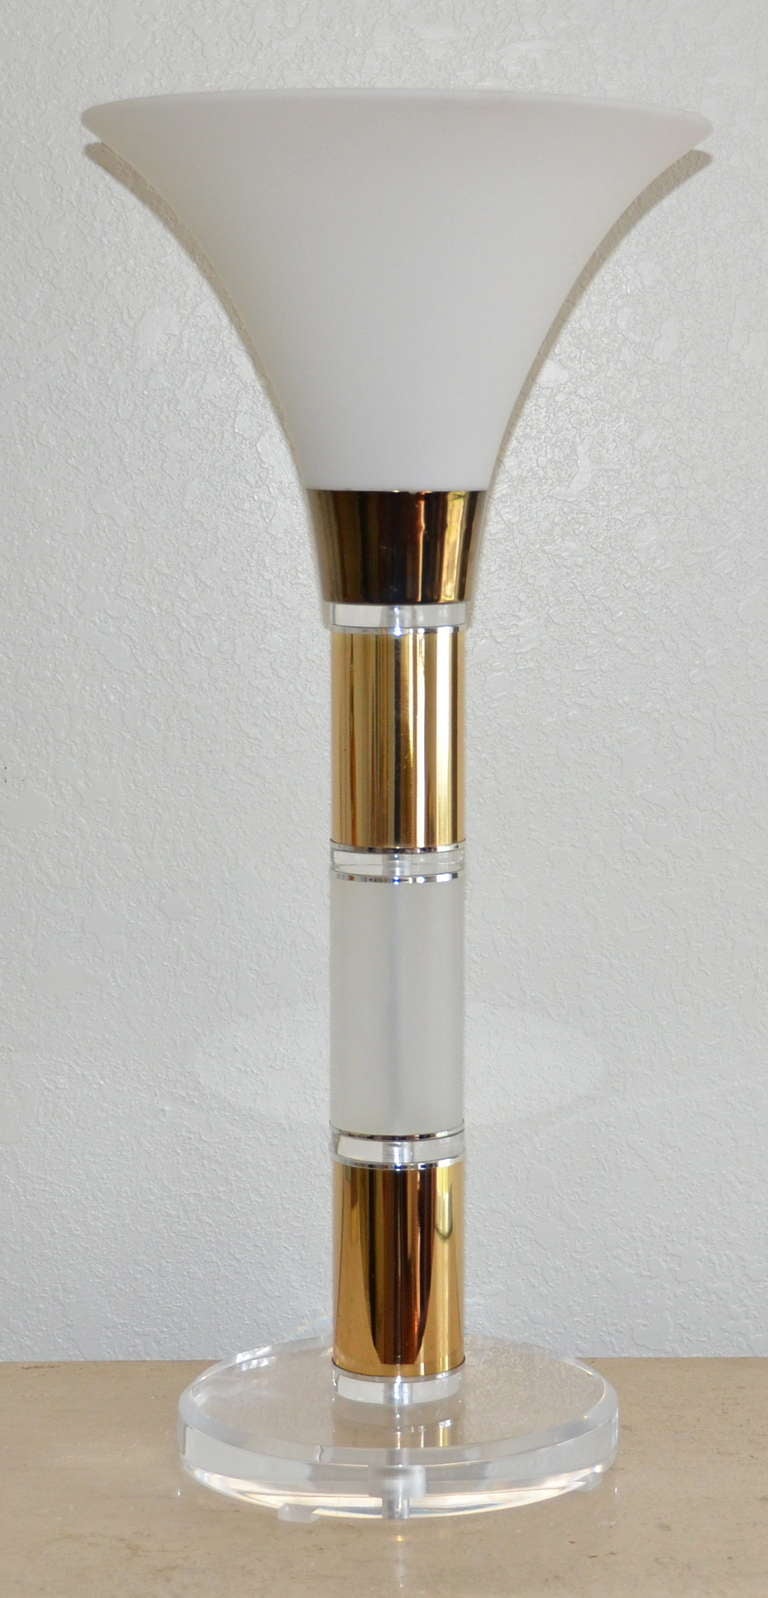 This is a large cool wonderful midcentury 1960s modern clear and frosted Lucite and brass banded Lamp torchiere with a frosted urn shape glass shade and clear Lucite base-

A very solid construction and nicely detailed. It creates a bright glowing